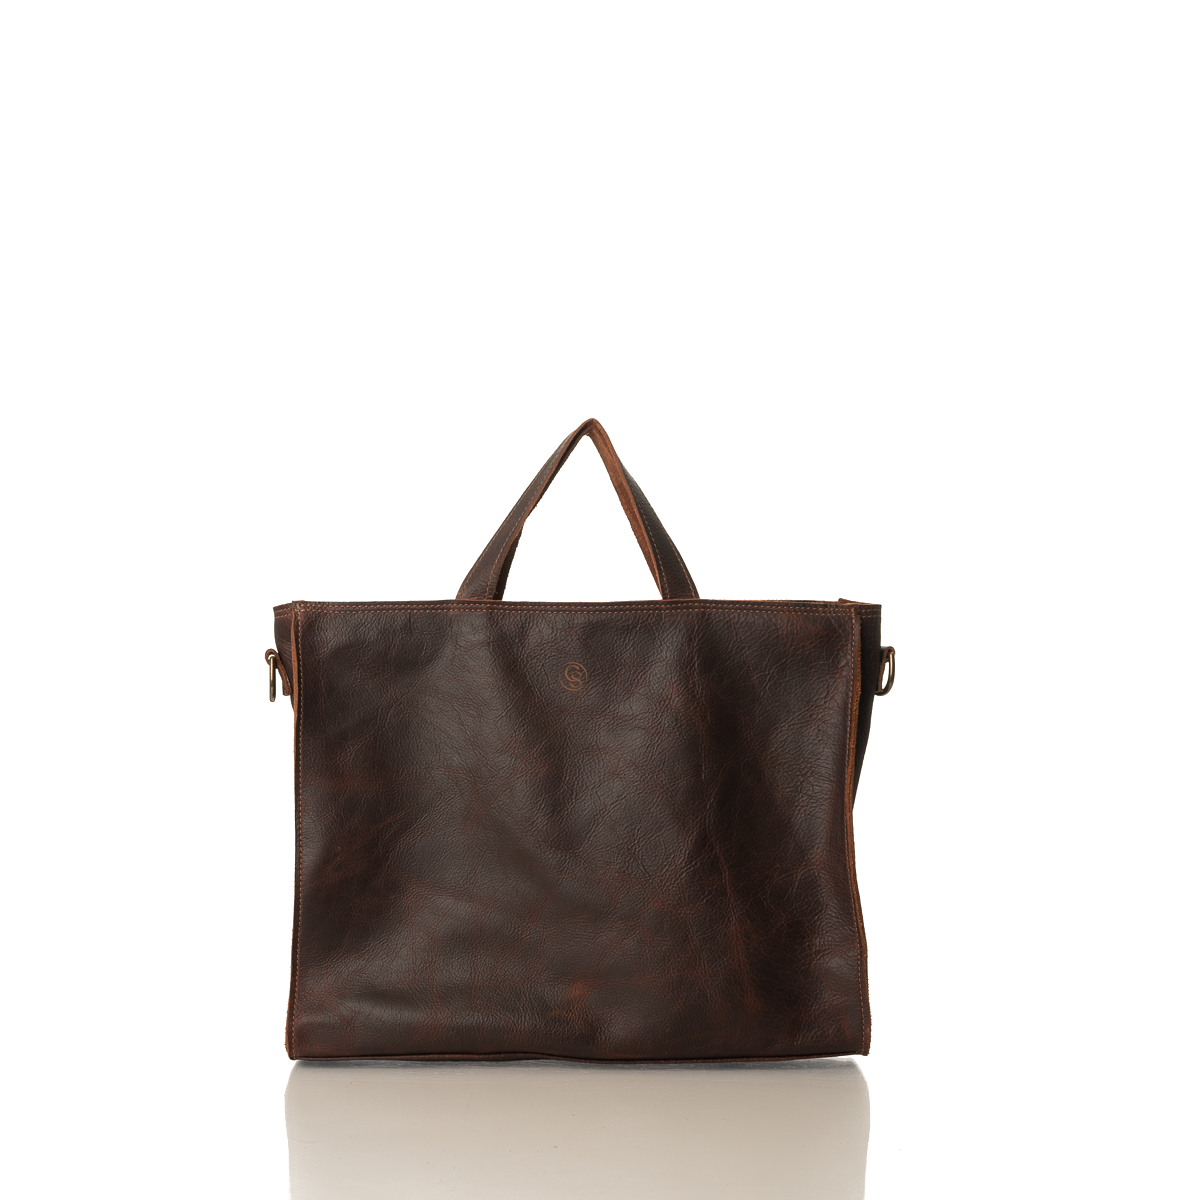 Mila | Large Satchel with Cross-Body Strap